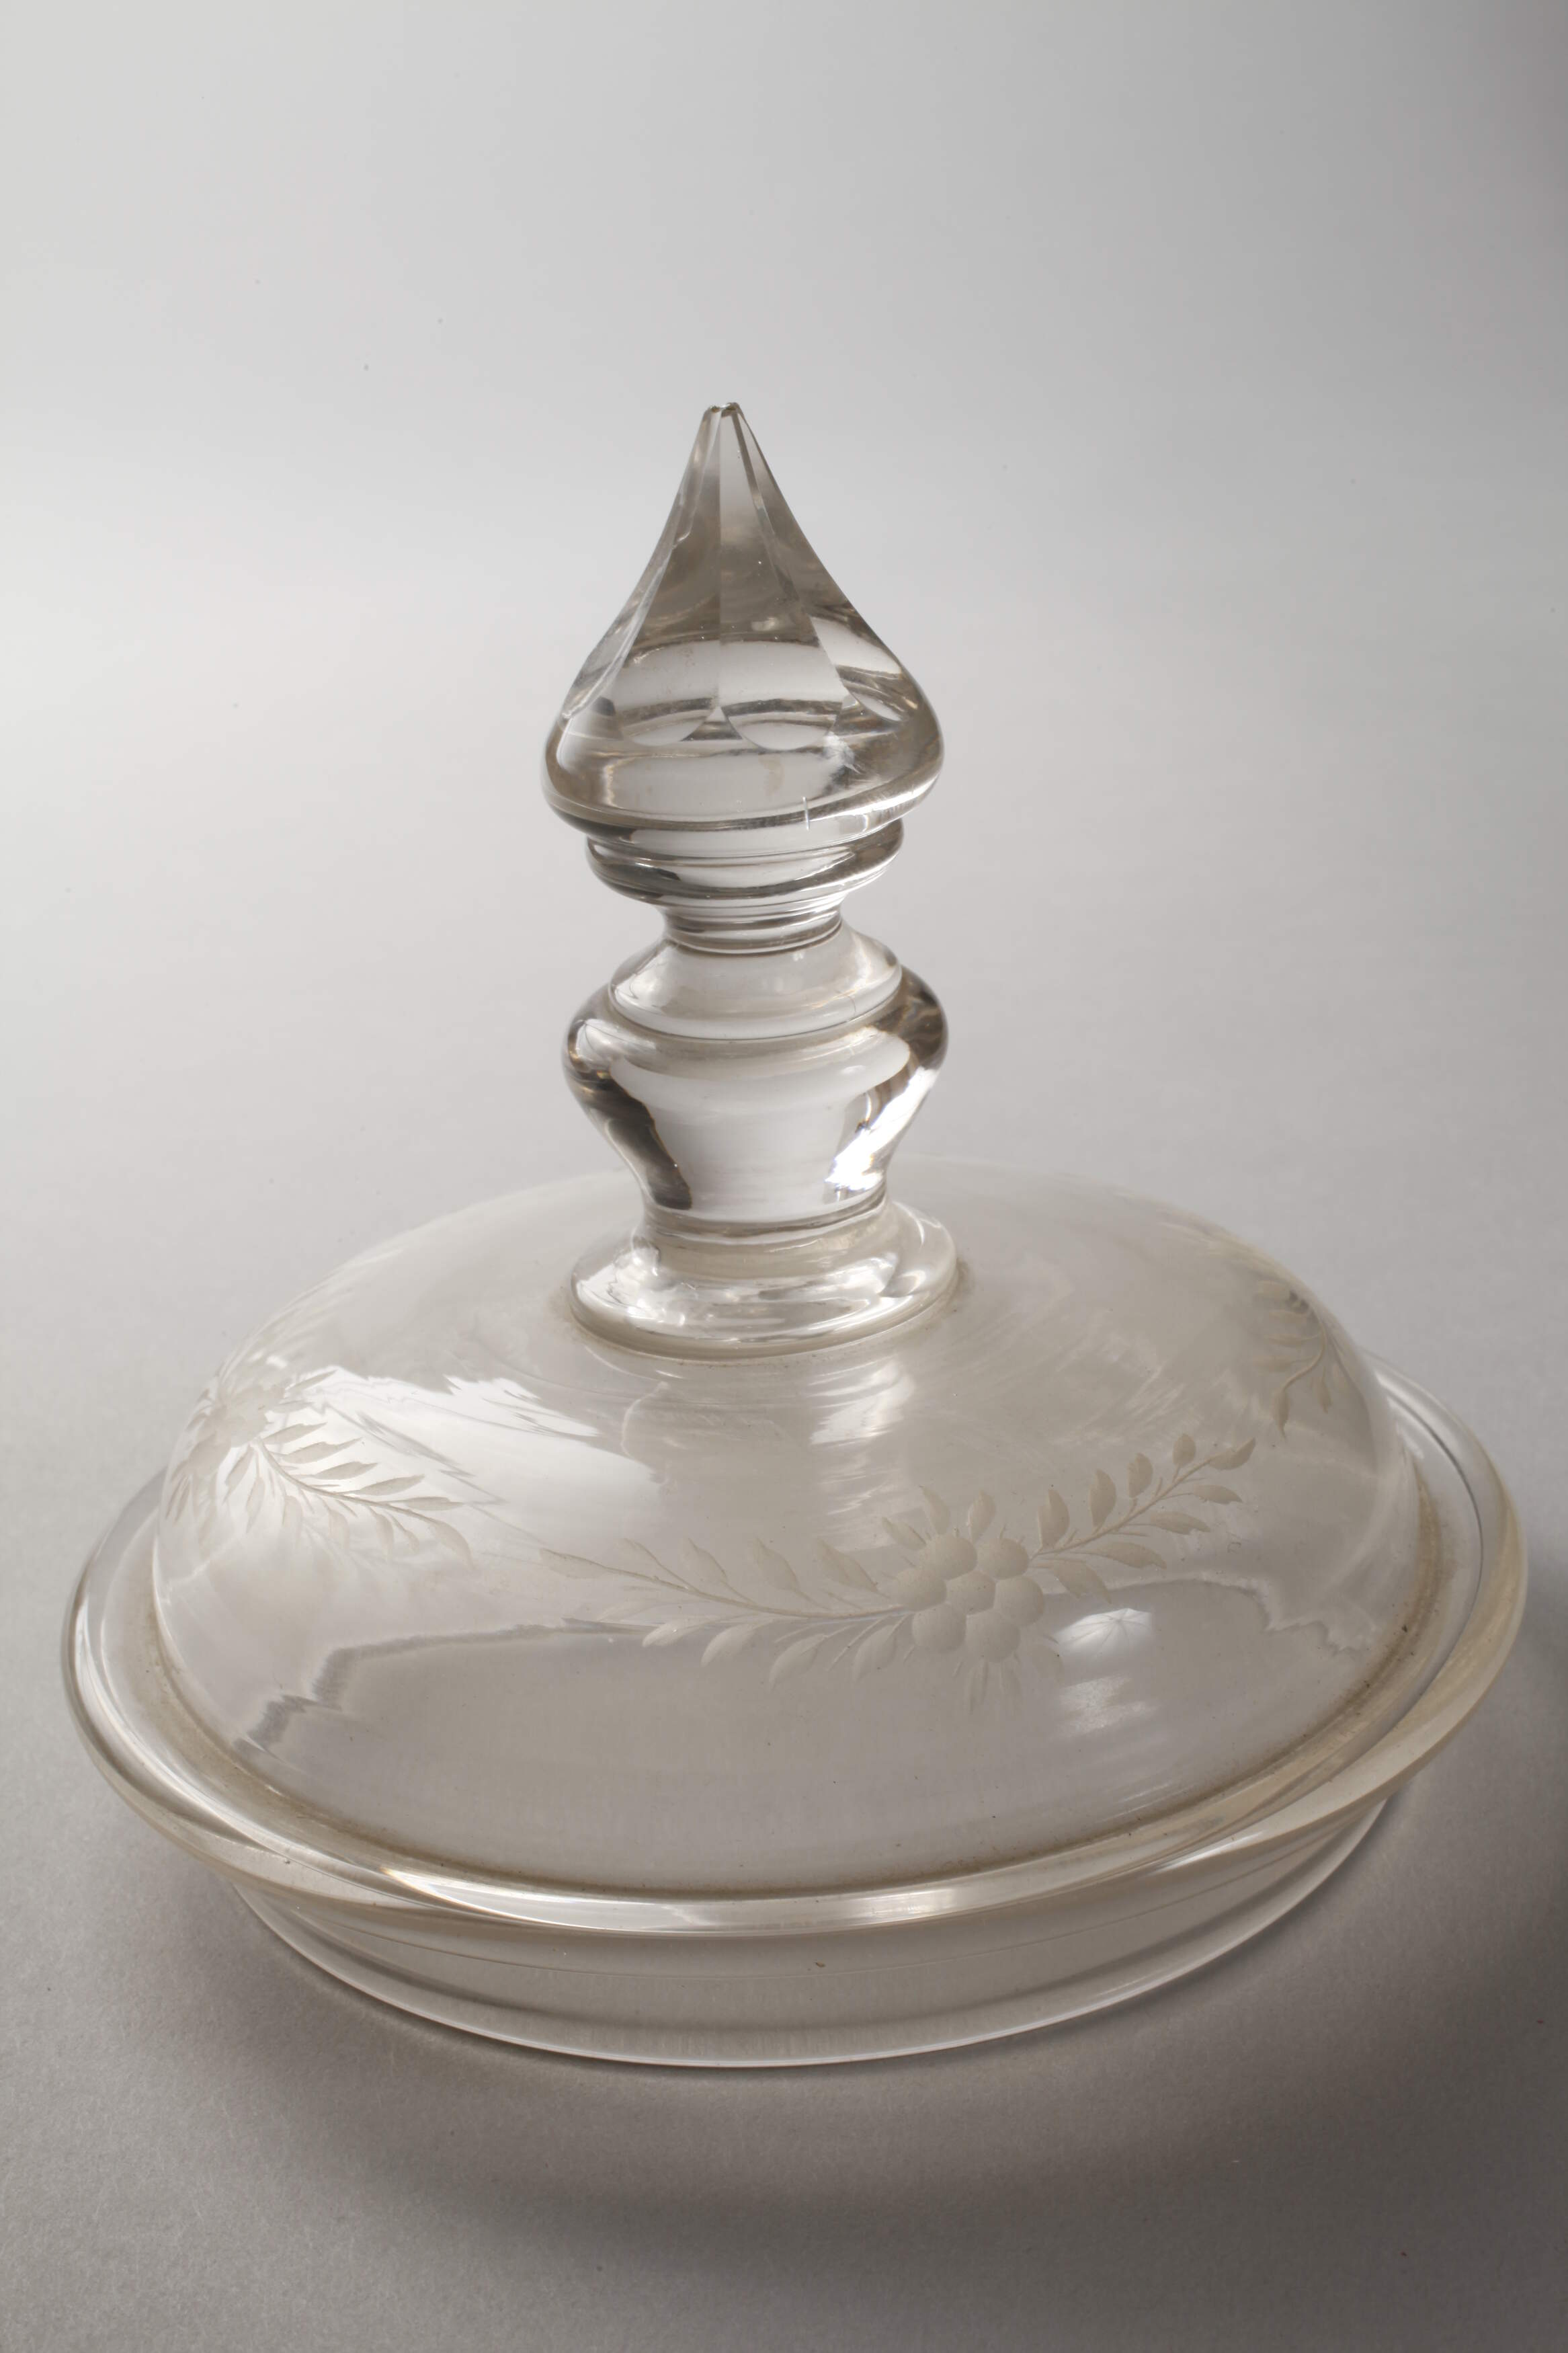 Large wedding goblet from aristocratic property - Image 6 of 7